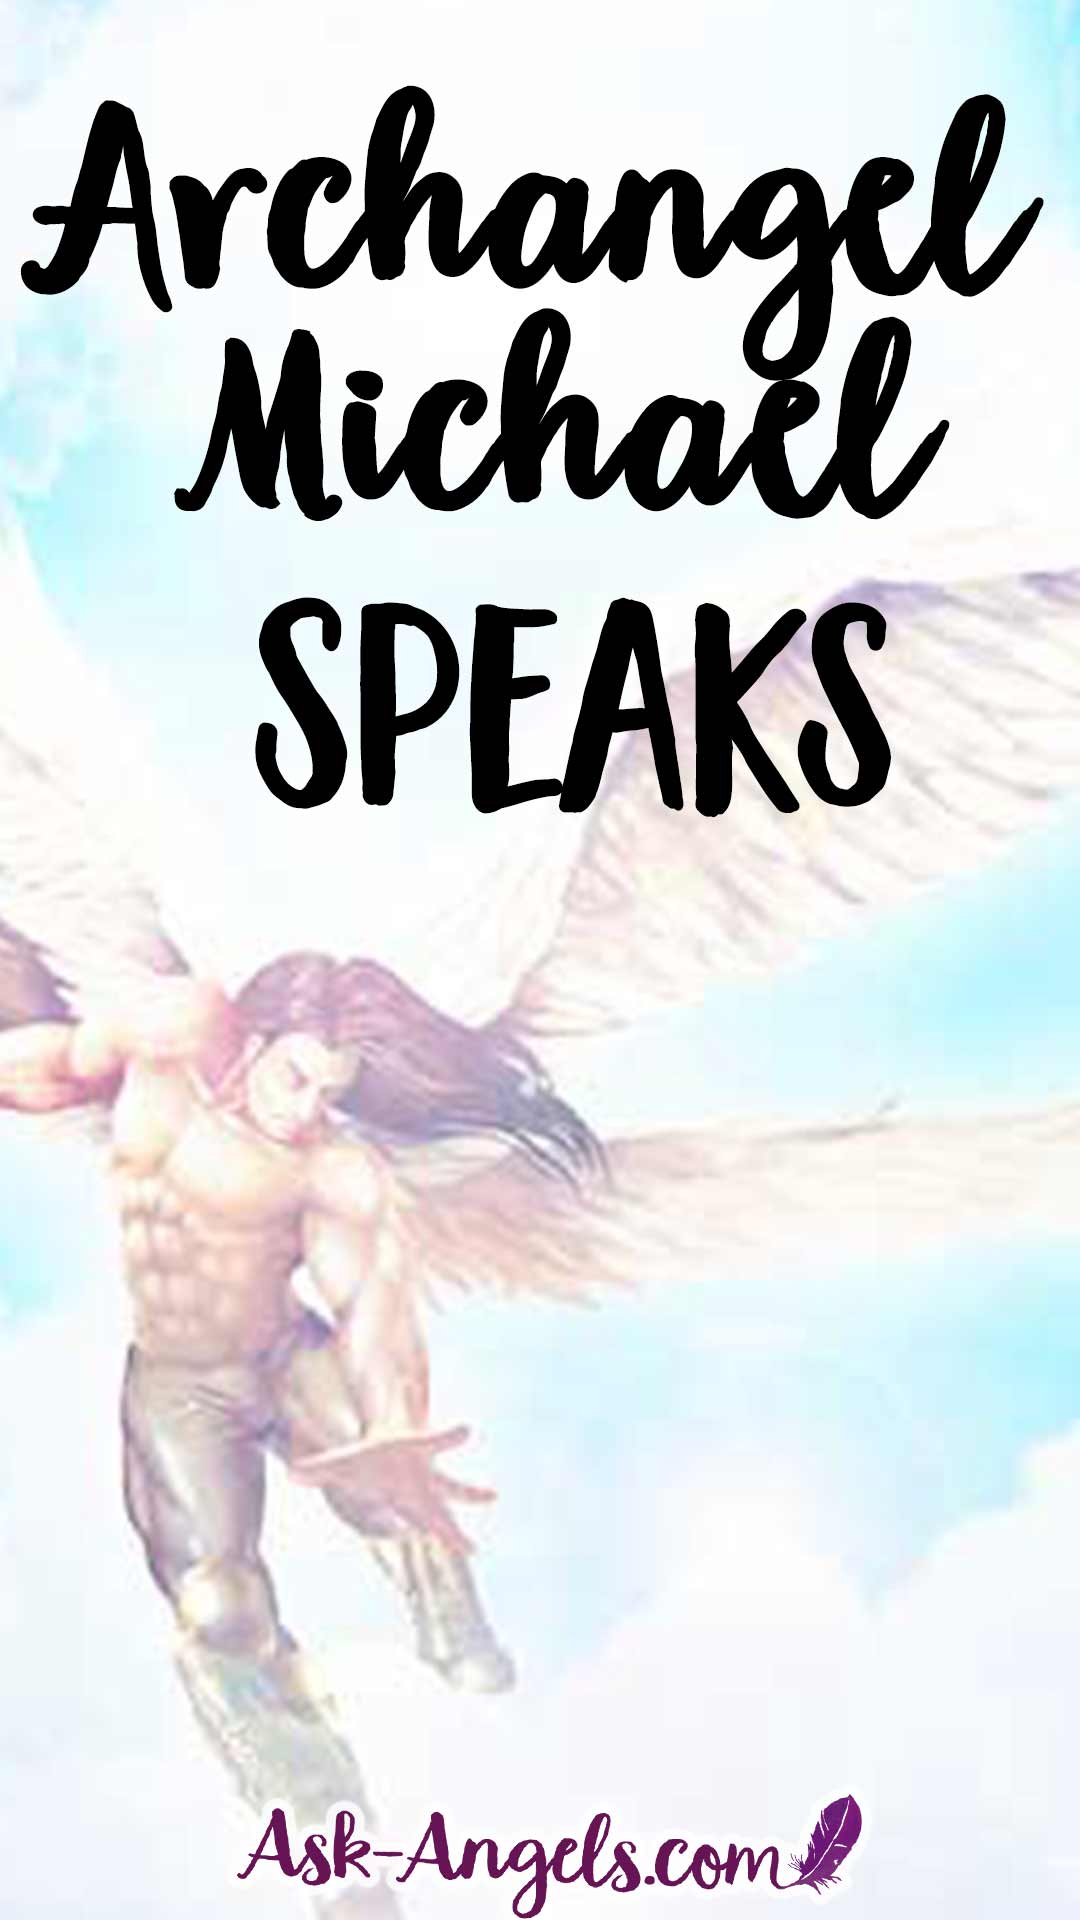 Archangel Michael speaks in this short angel message and frequency transmission. Become All That You Are.